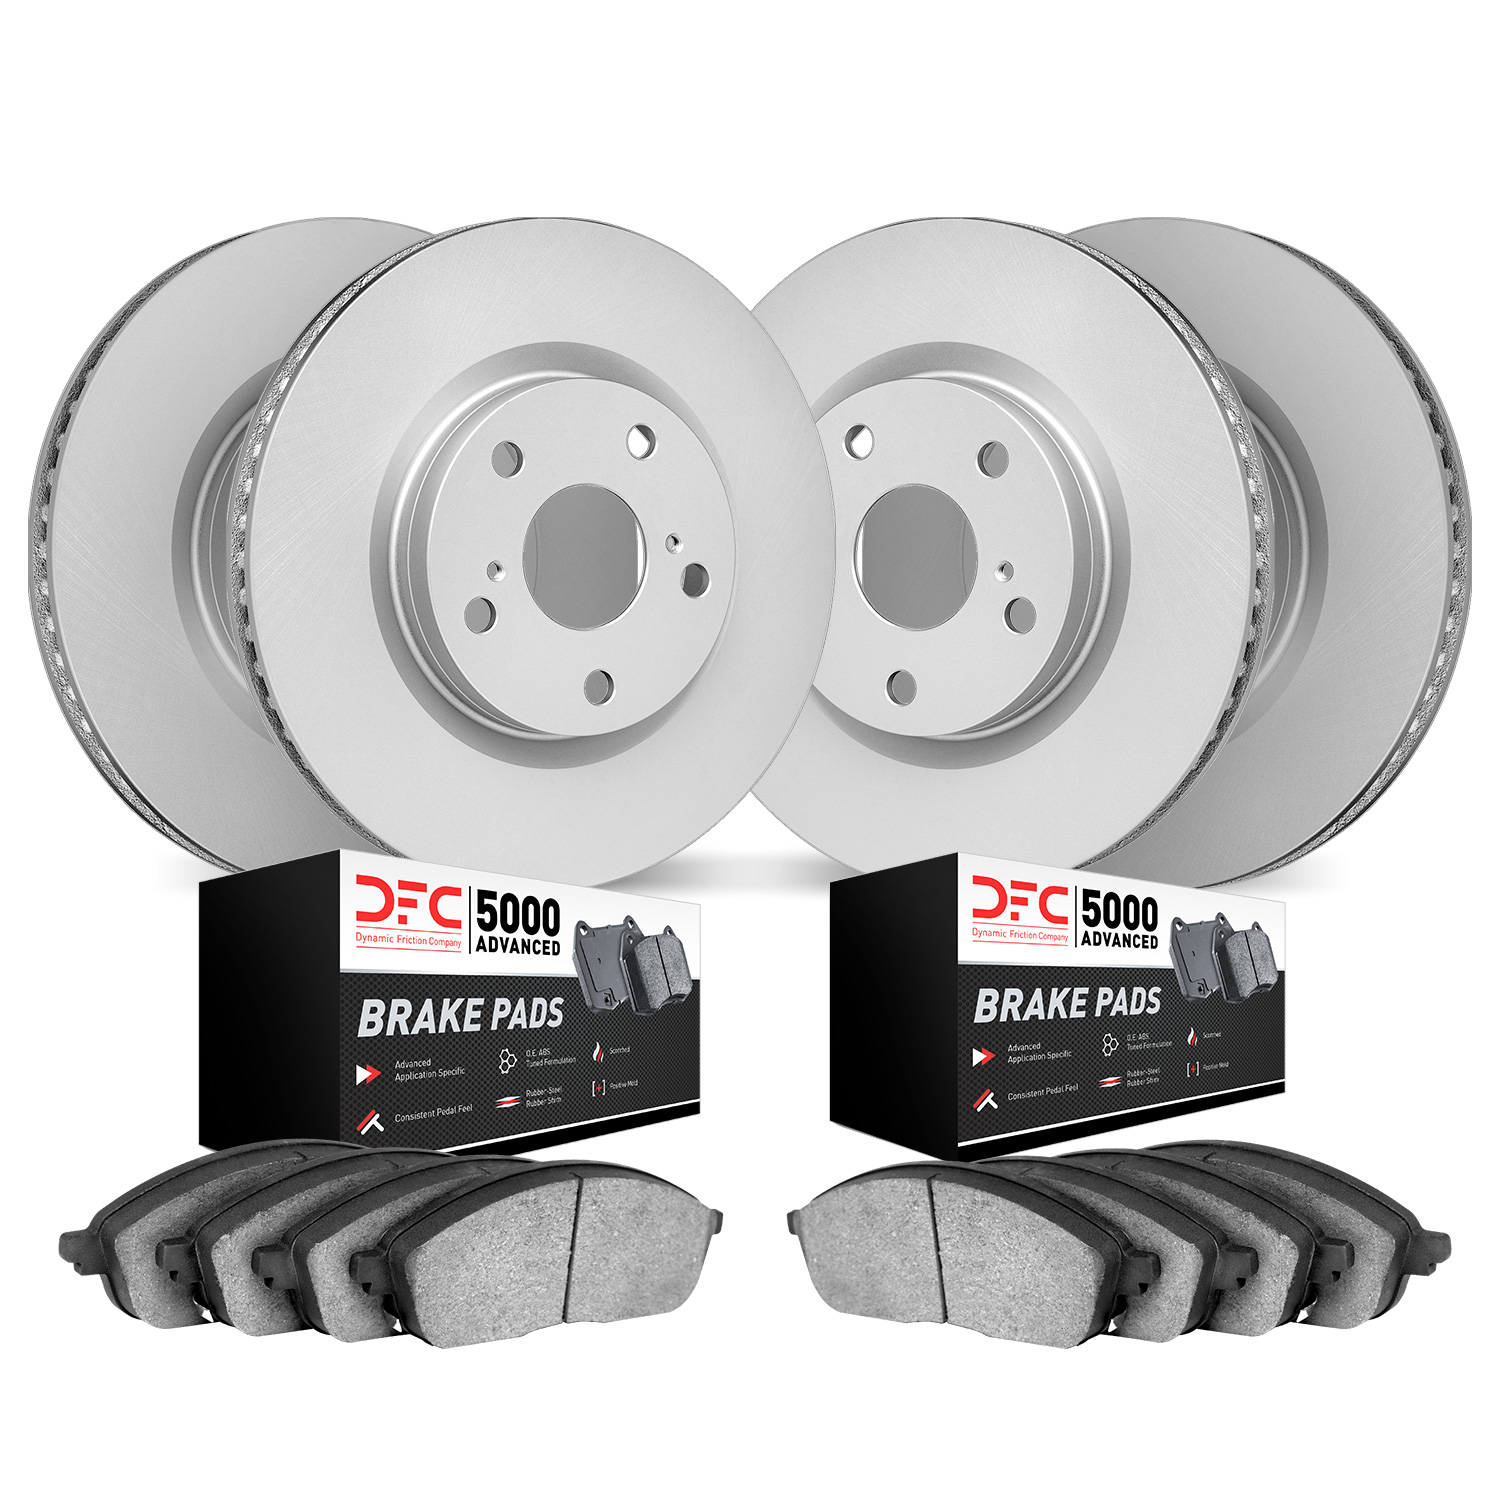 4504-48008 Geospec Brake Rotors w/5000 Advanced Brake Pads Kit, 1997-2005 GM, Position: Front and Rear